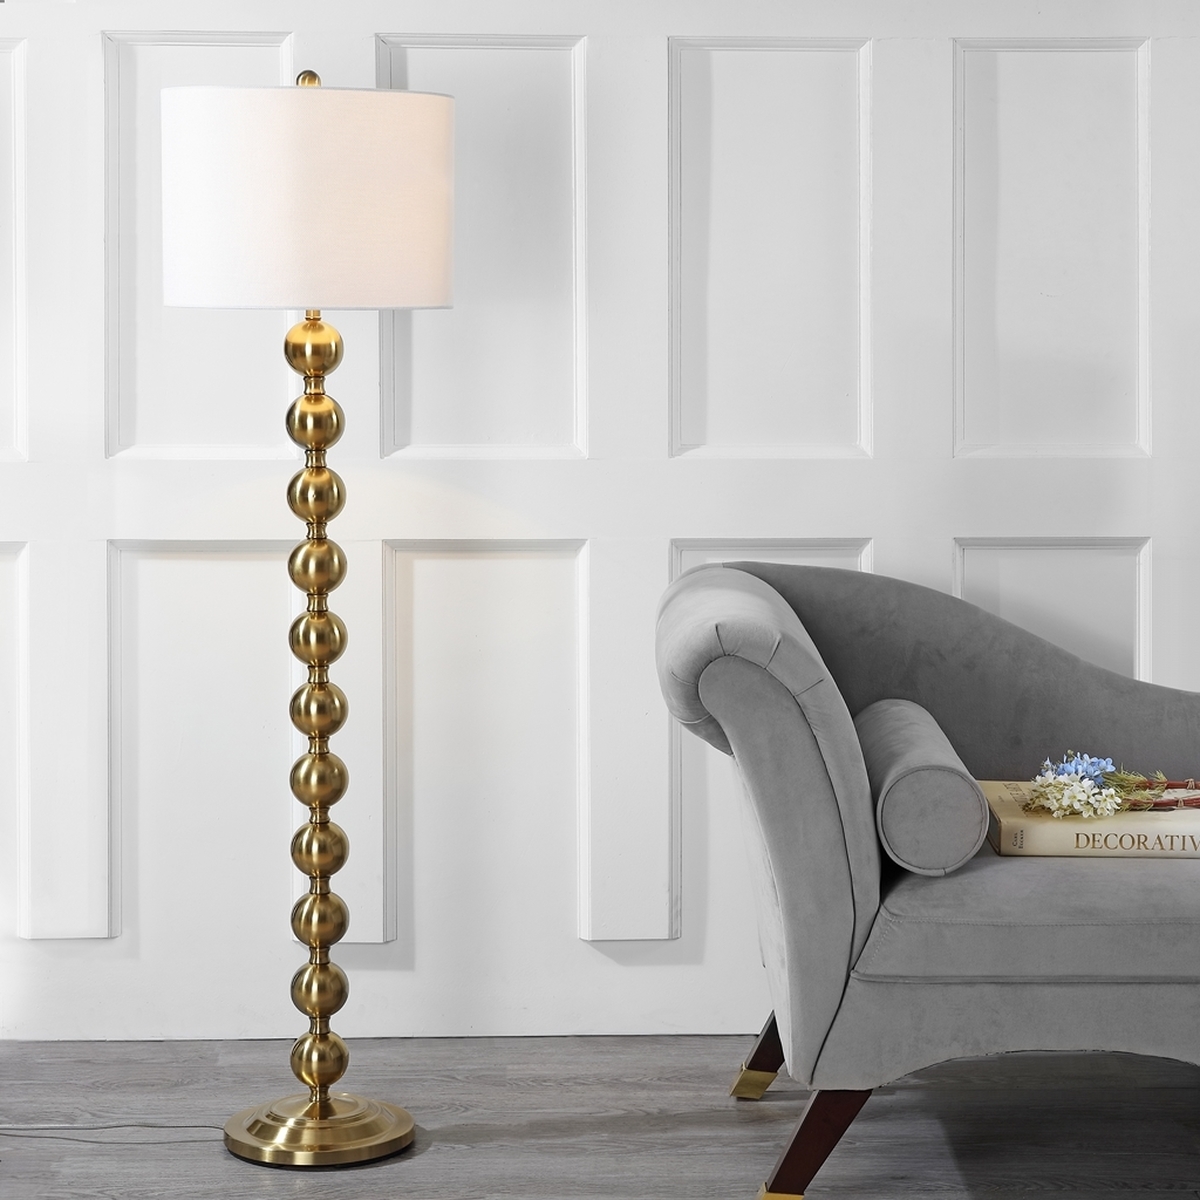 Reflections 58.5-Inch H Stacked Ball Floor Lamp - Brass - Arlo Home - Image 3